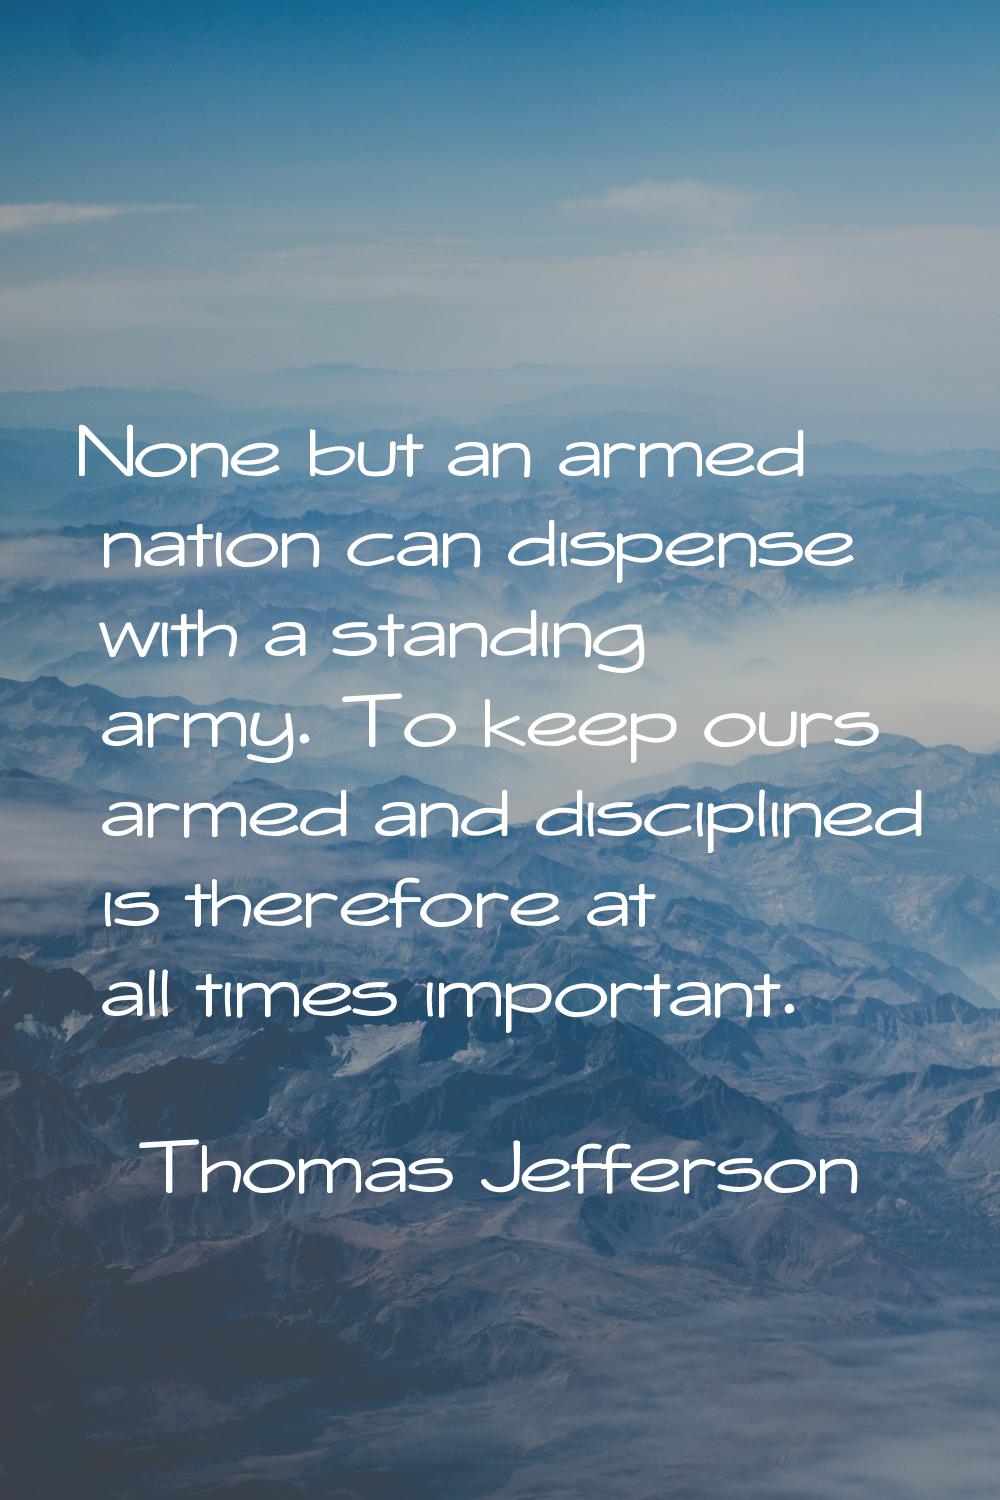 None but an armed nation can dispense with a standing army. To keep ours armed and disciplined is t